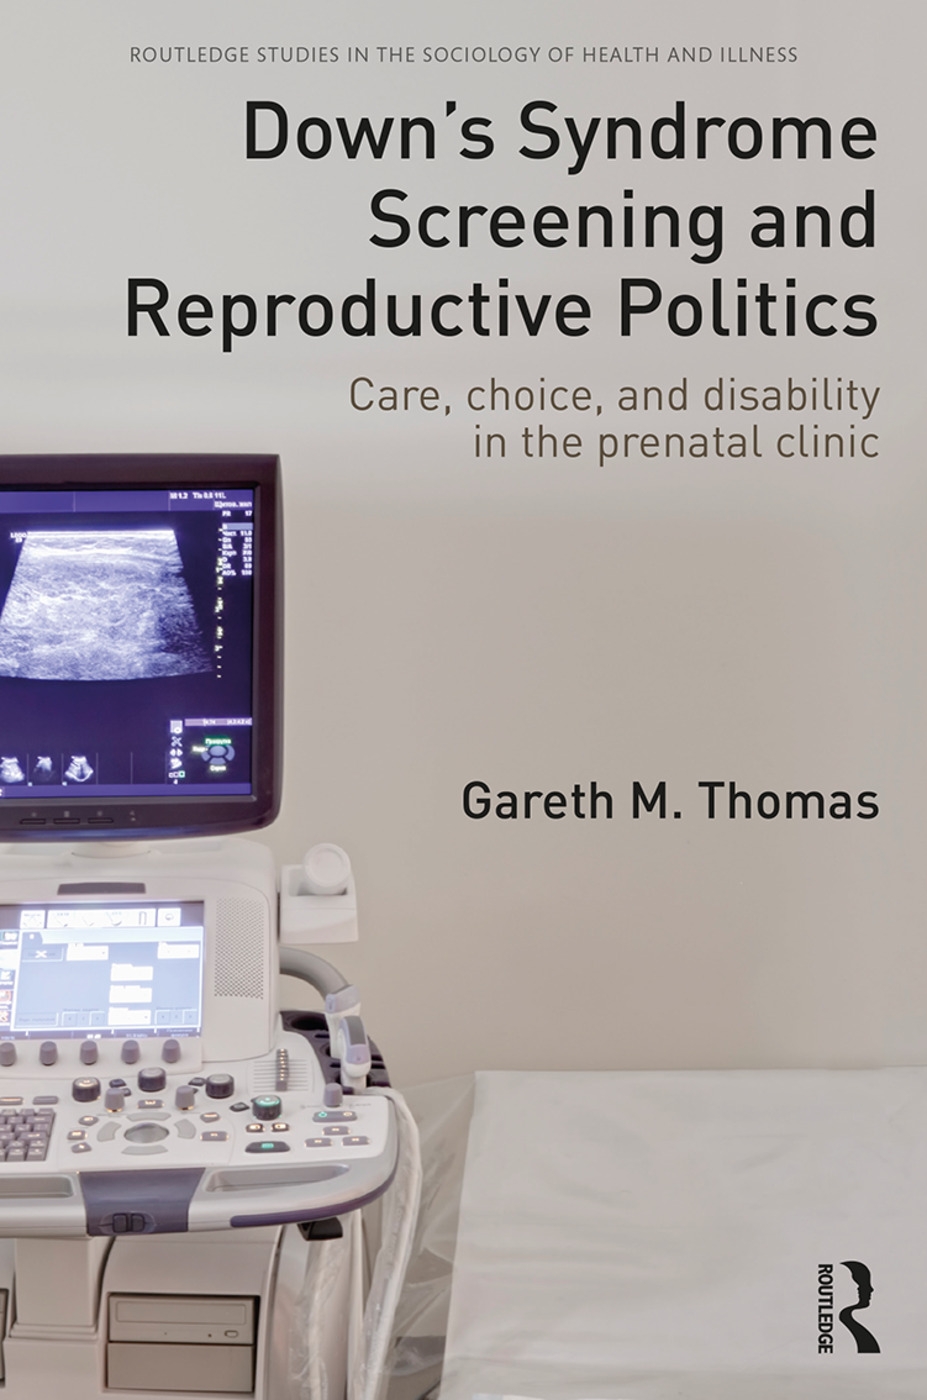 Down’s Syndrome Screening and Reproductive Politics: Care, Choice, and Disability in the Prenatal Clinic